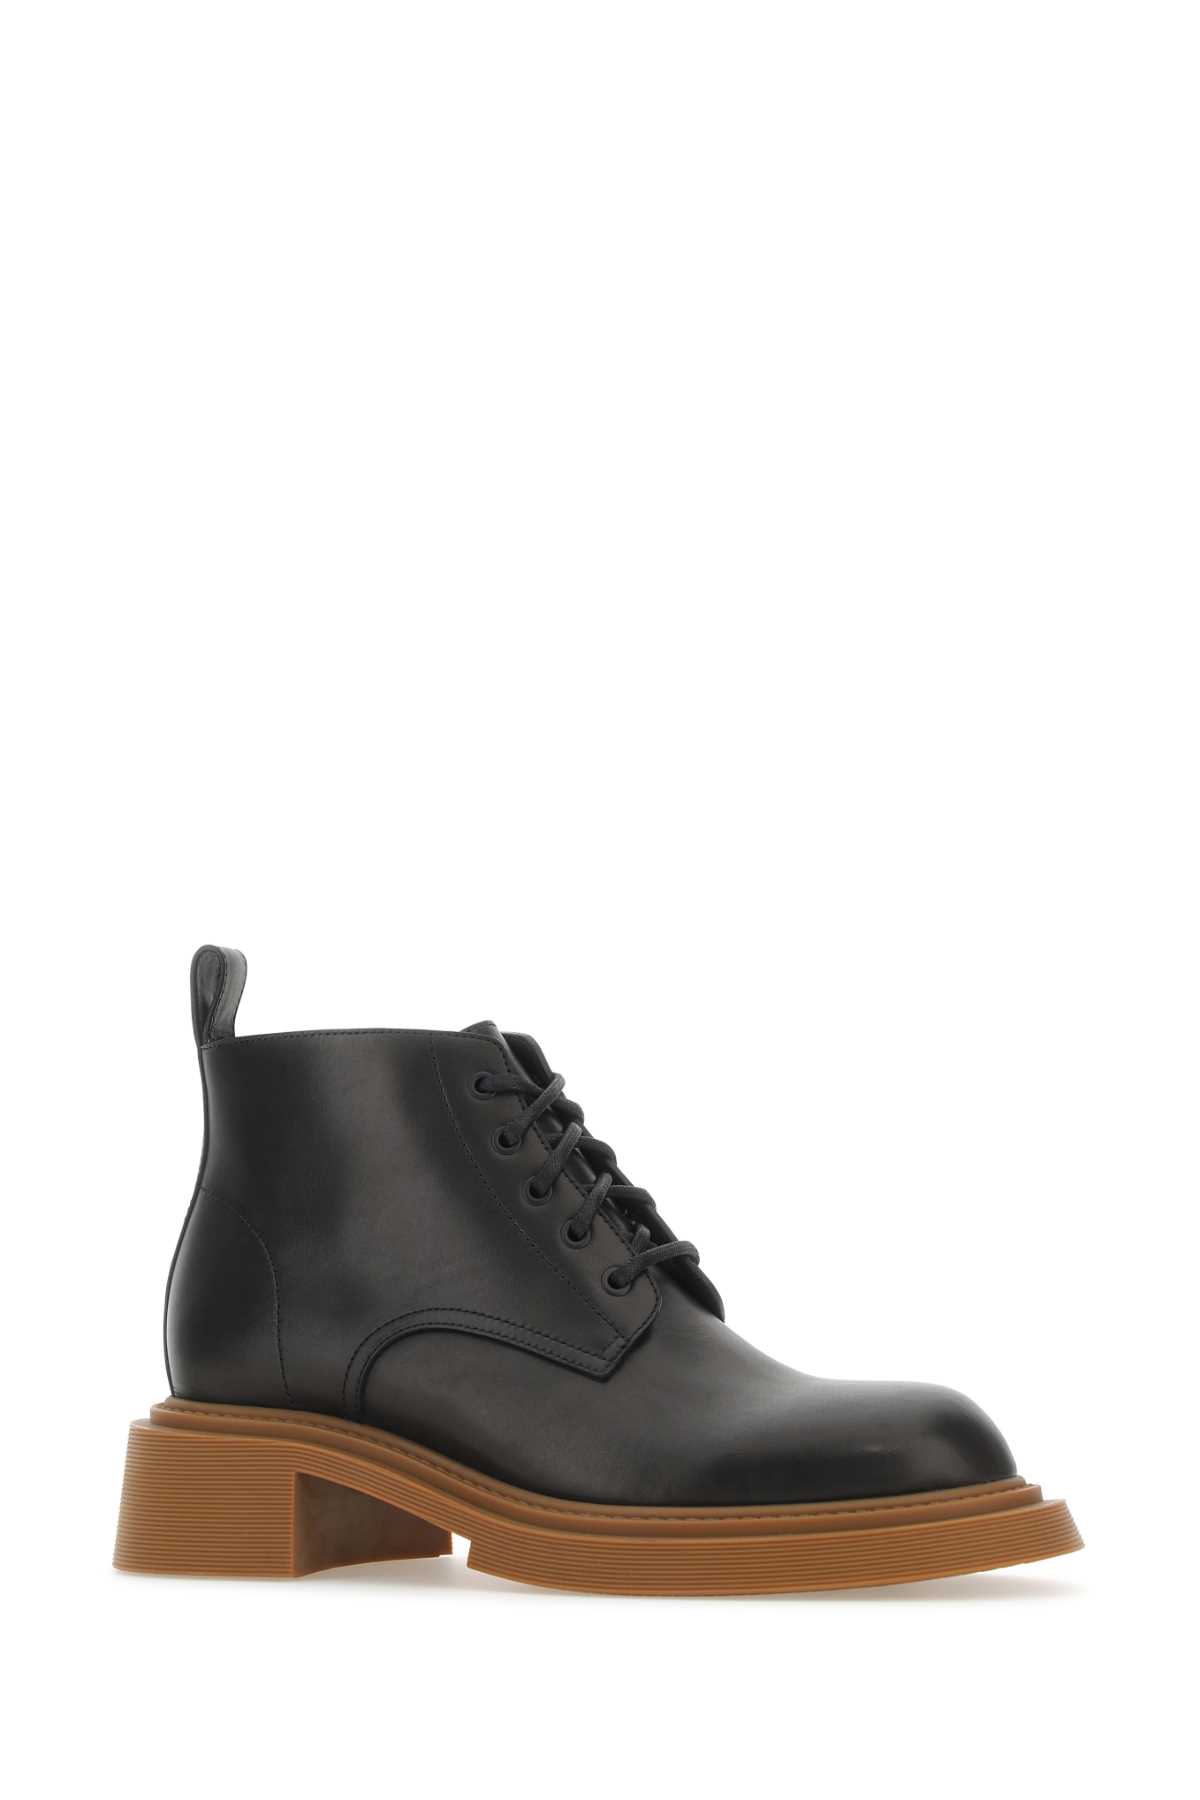 Shop Loewe Black Leather Ankle Boots